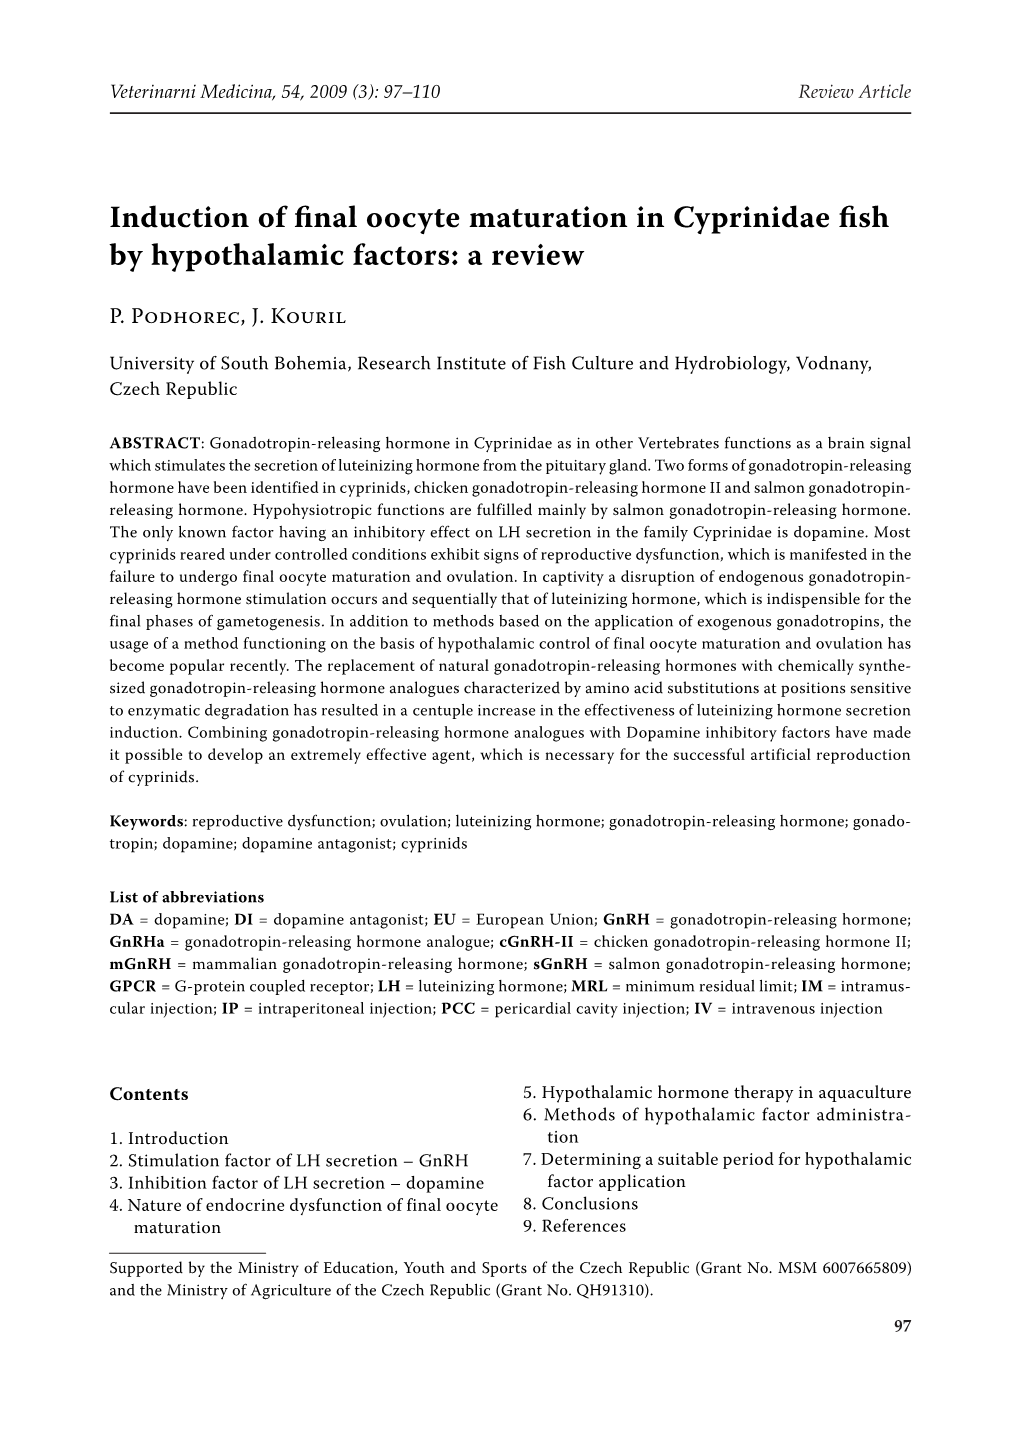 Induction of Final Oocyte Maturation in Cyprinidae Fish by Hypothalamic Factors: a Review